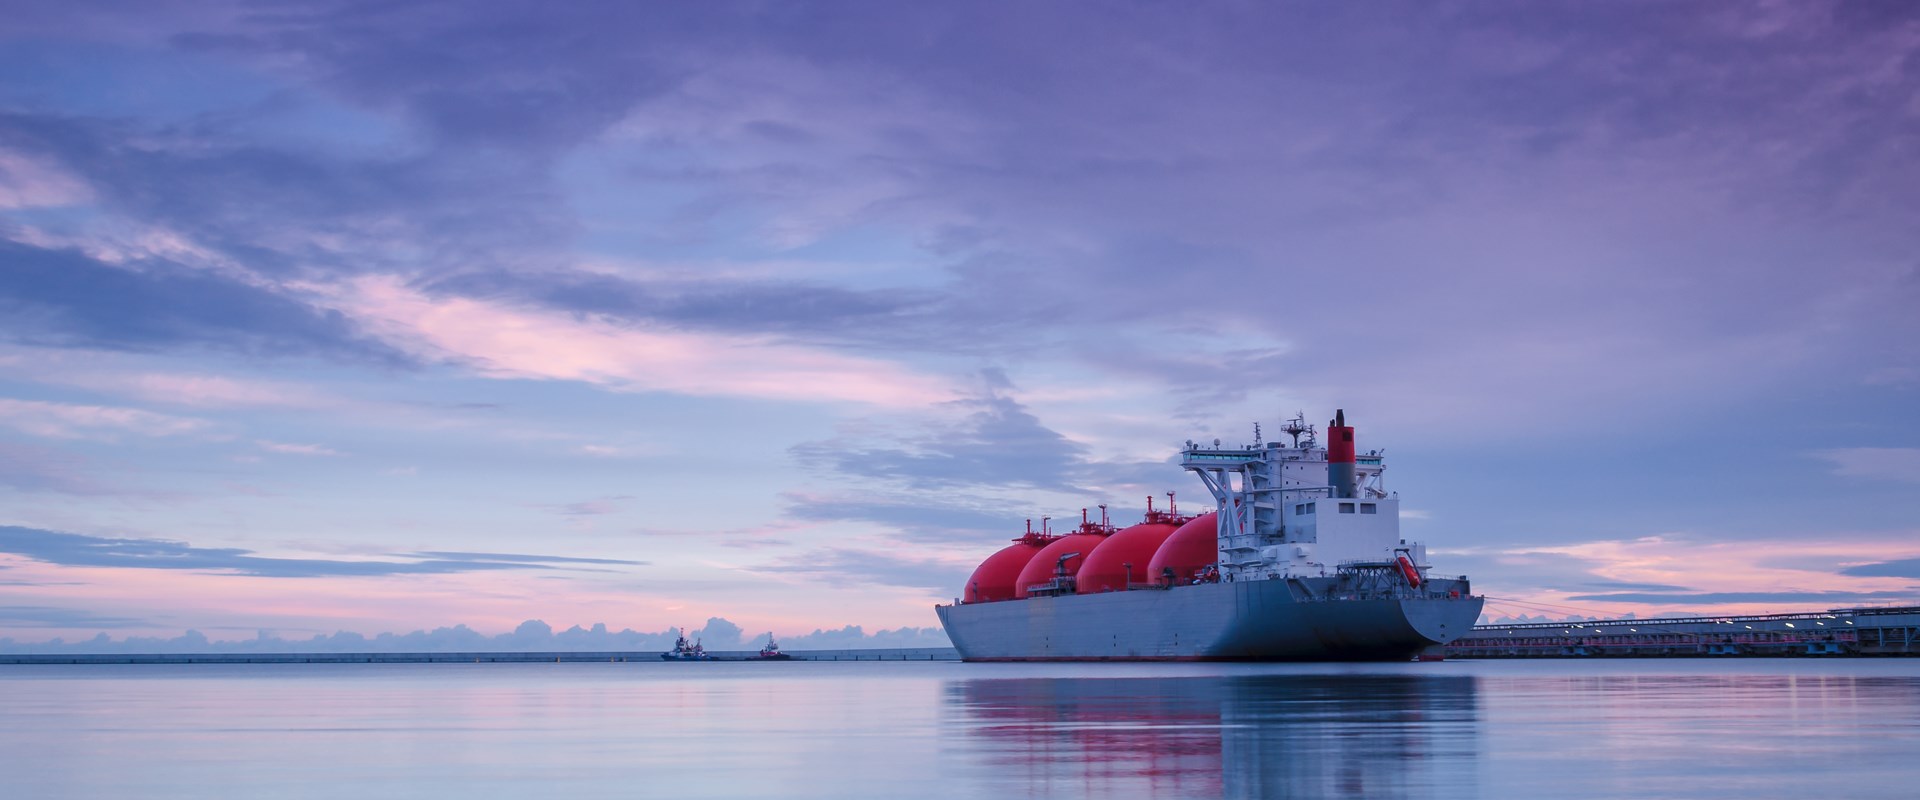 Image of an Liquified Natural Gas vessel in the water